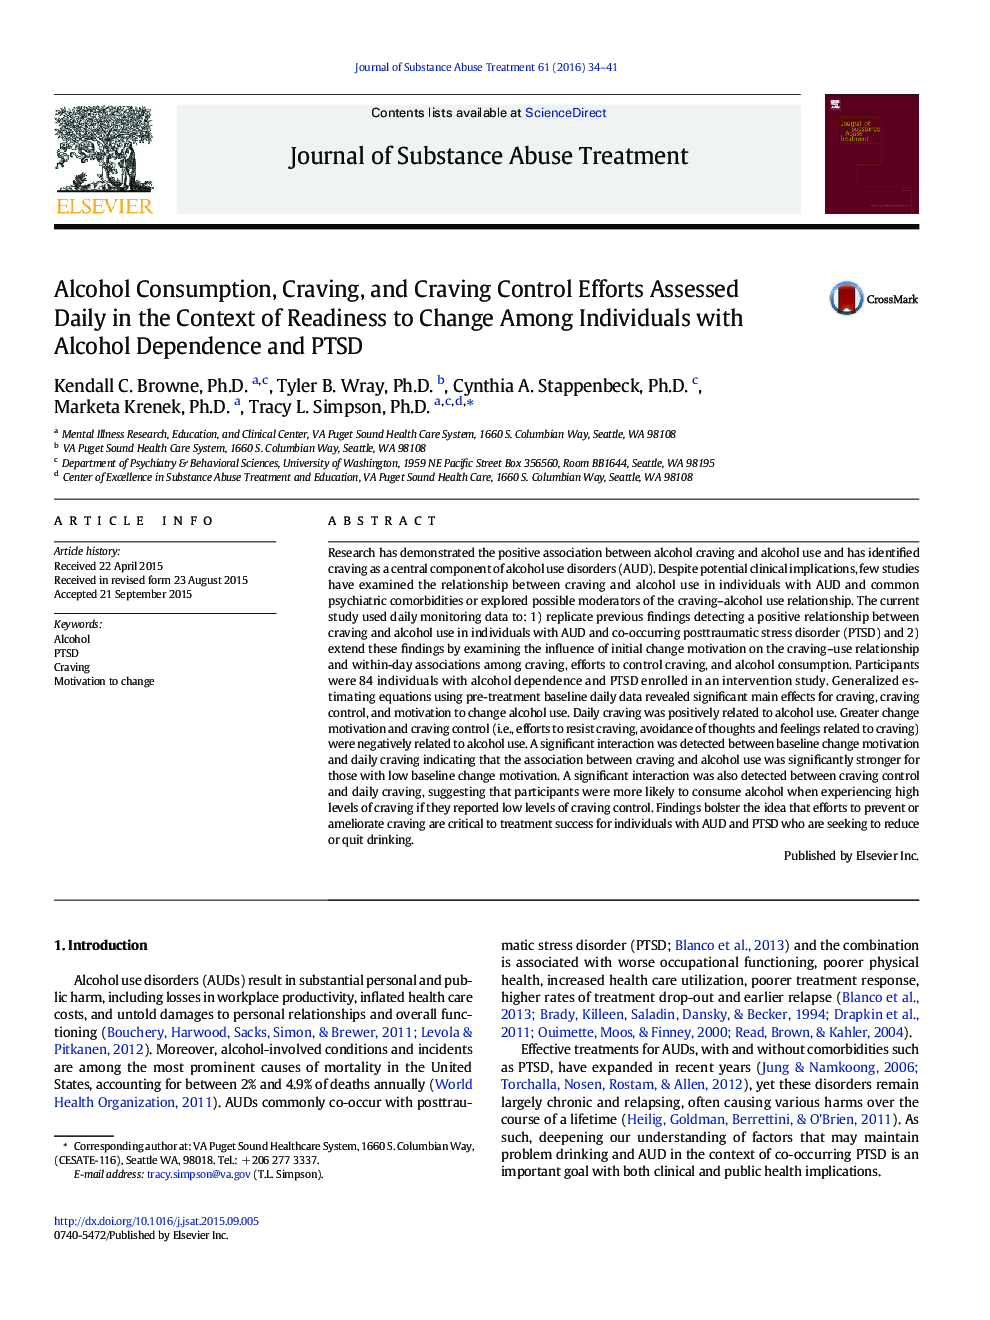 Alcohol Consumption, Craving, and Craving Control Efforts Assessed Daily in the Context of Readiness to Change Among Individuals with Alcohol Dependence and PTSD